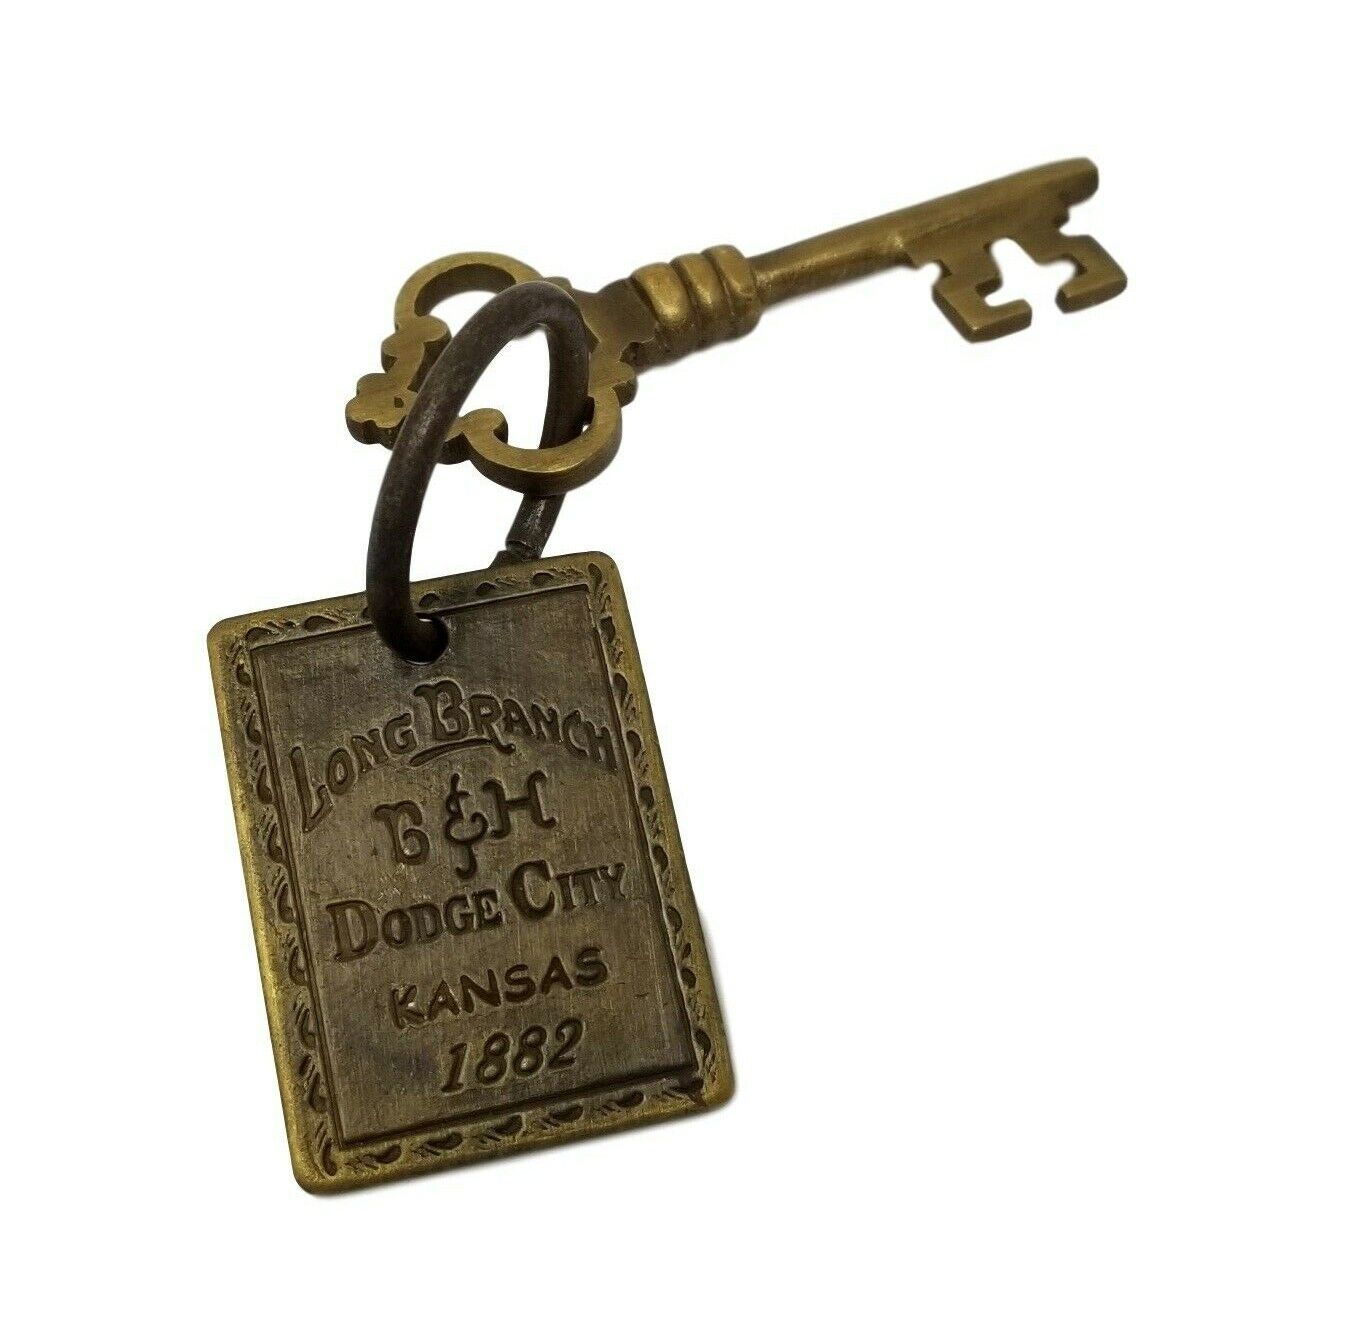 Long Branch 1882 Dodge City Brothel Room Solid Brass Tag & Key W/ Antique Finish